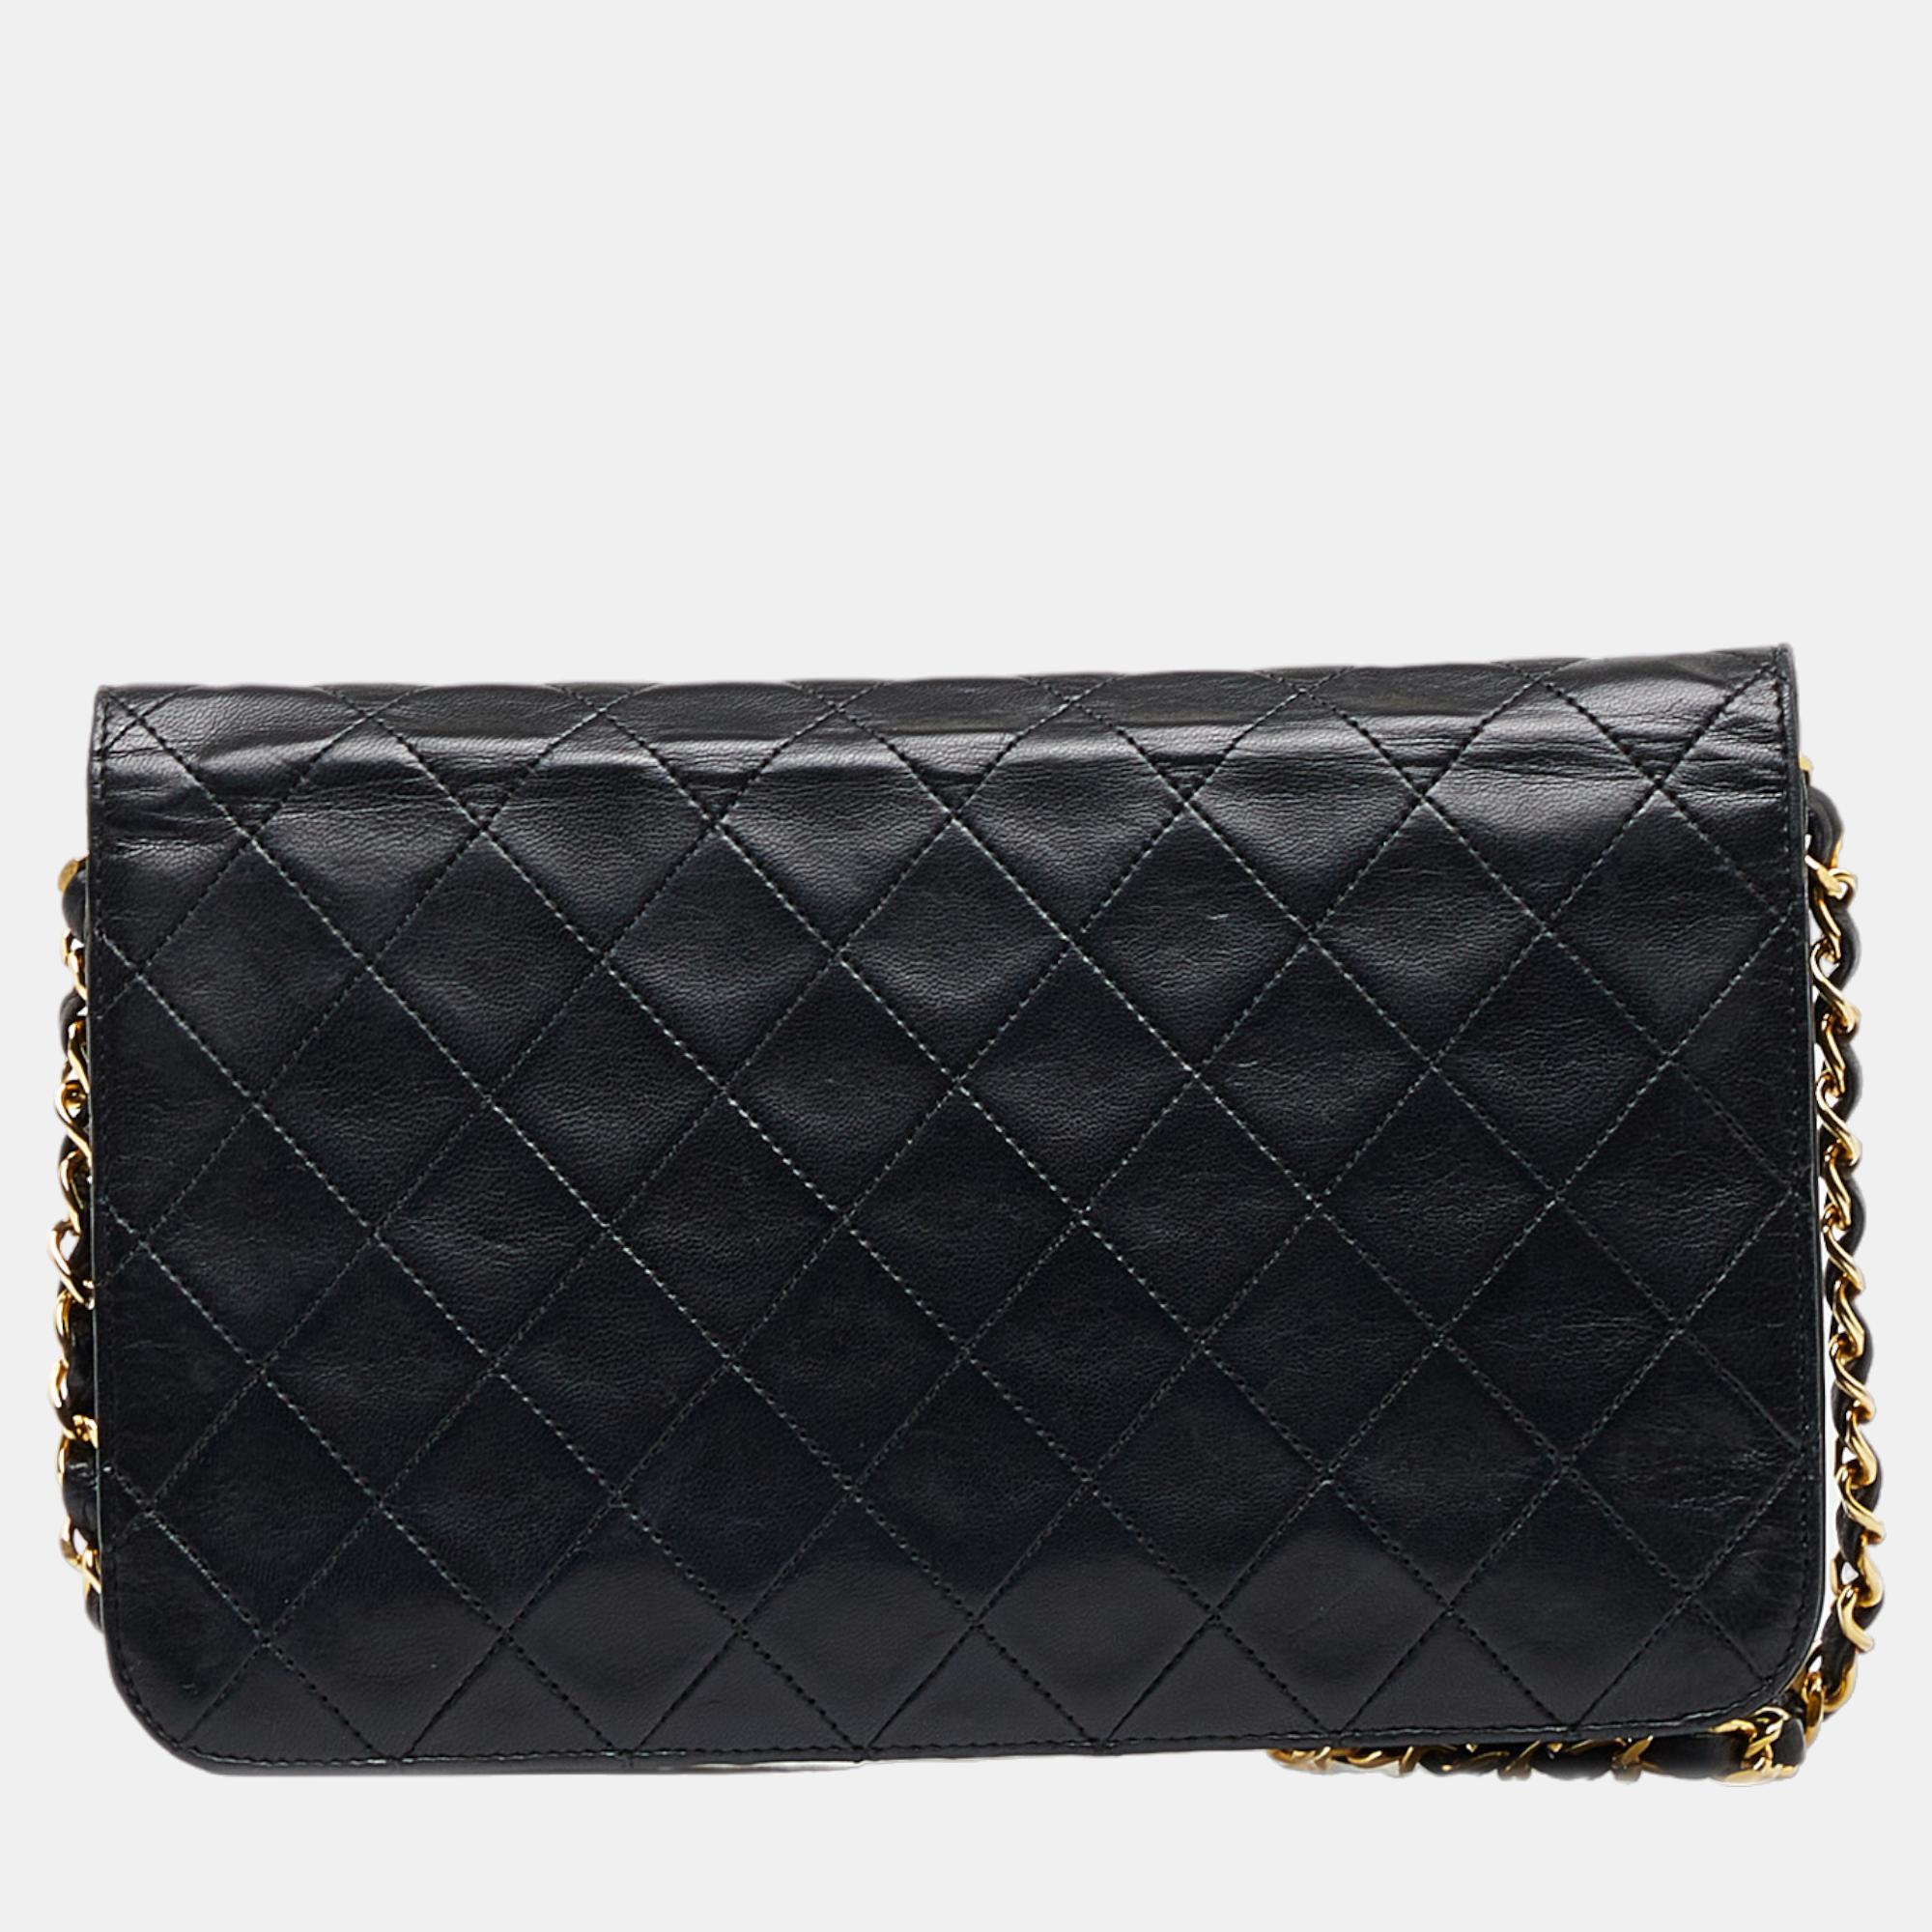 Chanel Black Small CC Quilted Full Flap Shoulder Bag